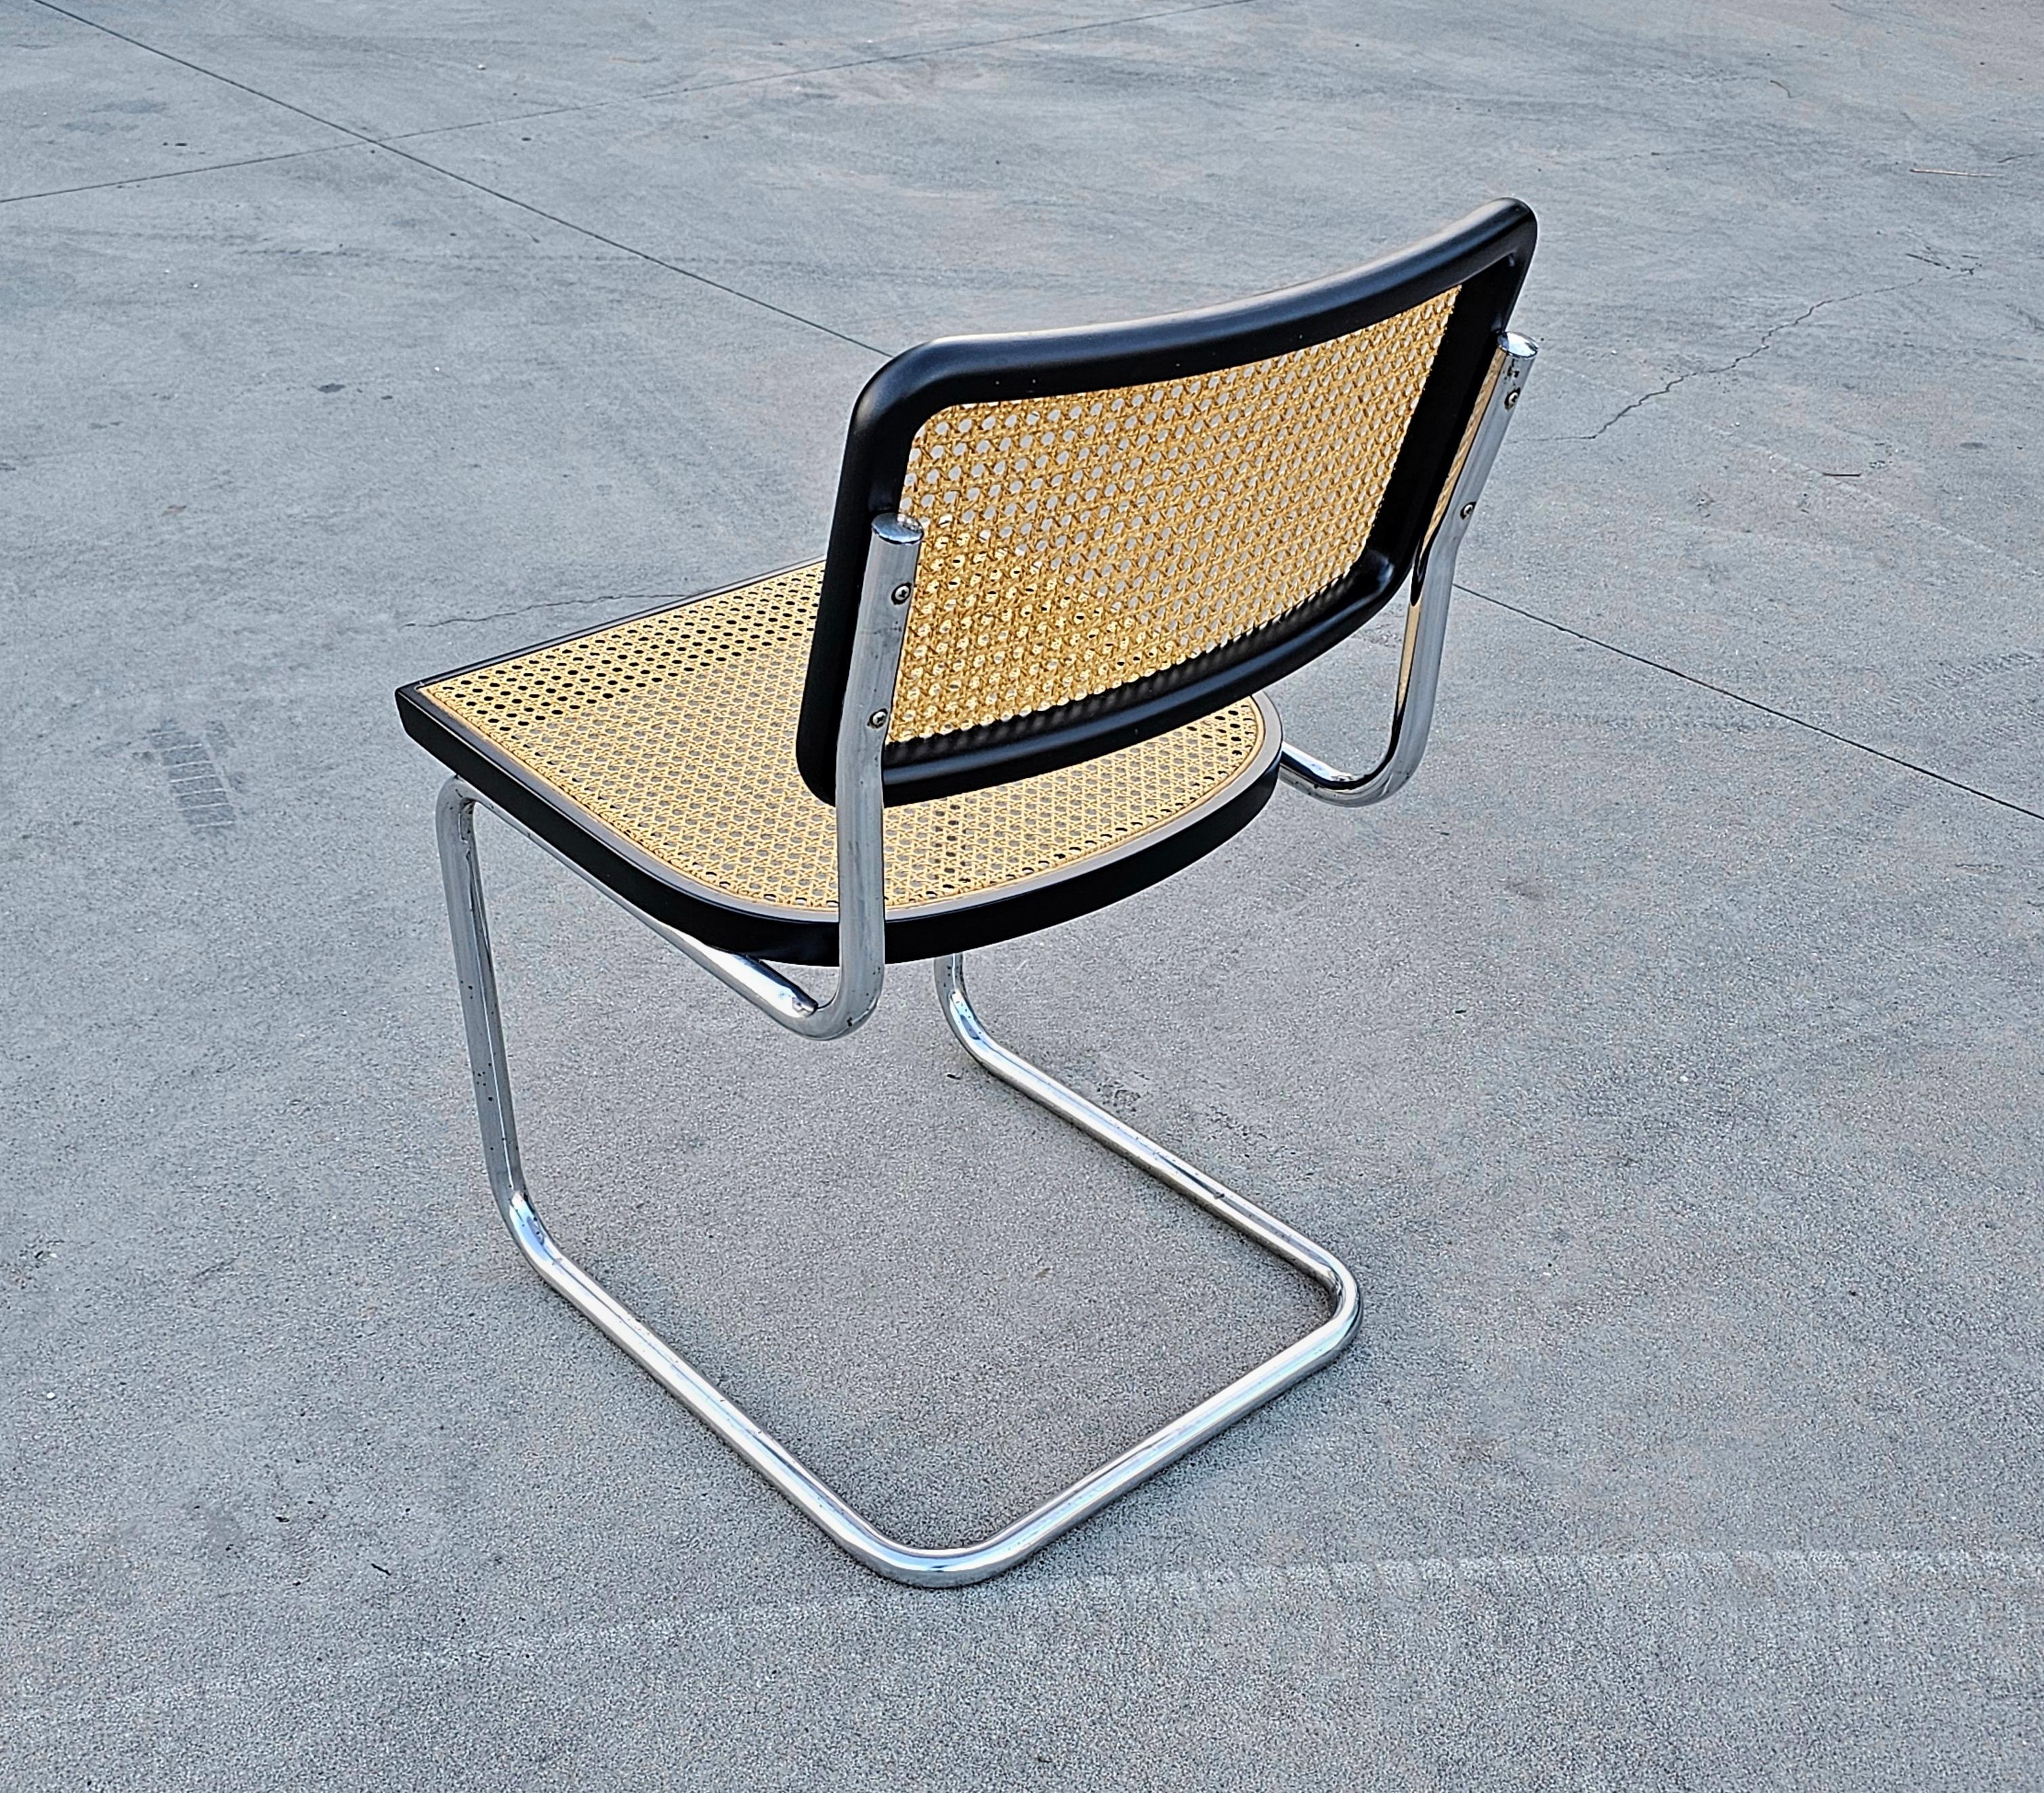 Mid-20th Century Cesca Chairs with Black Frames by Marcel Breuer attr. to Gavina, Italy 1960s For Sale